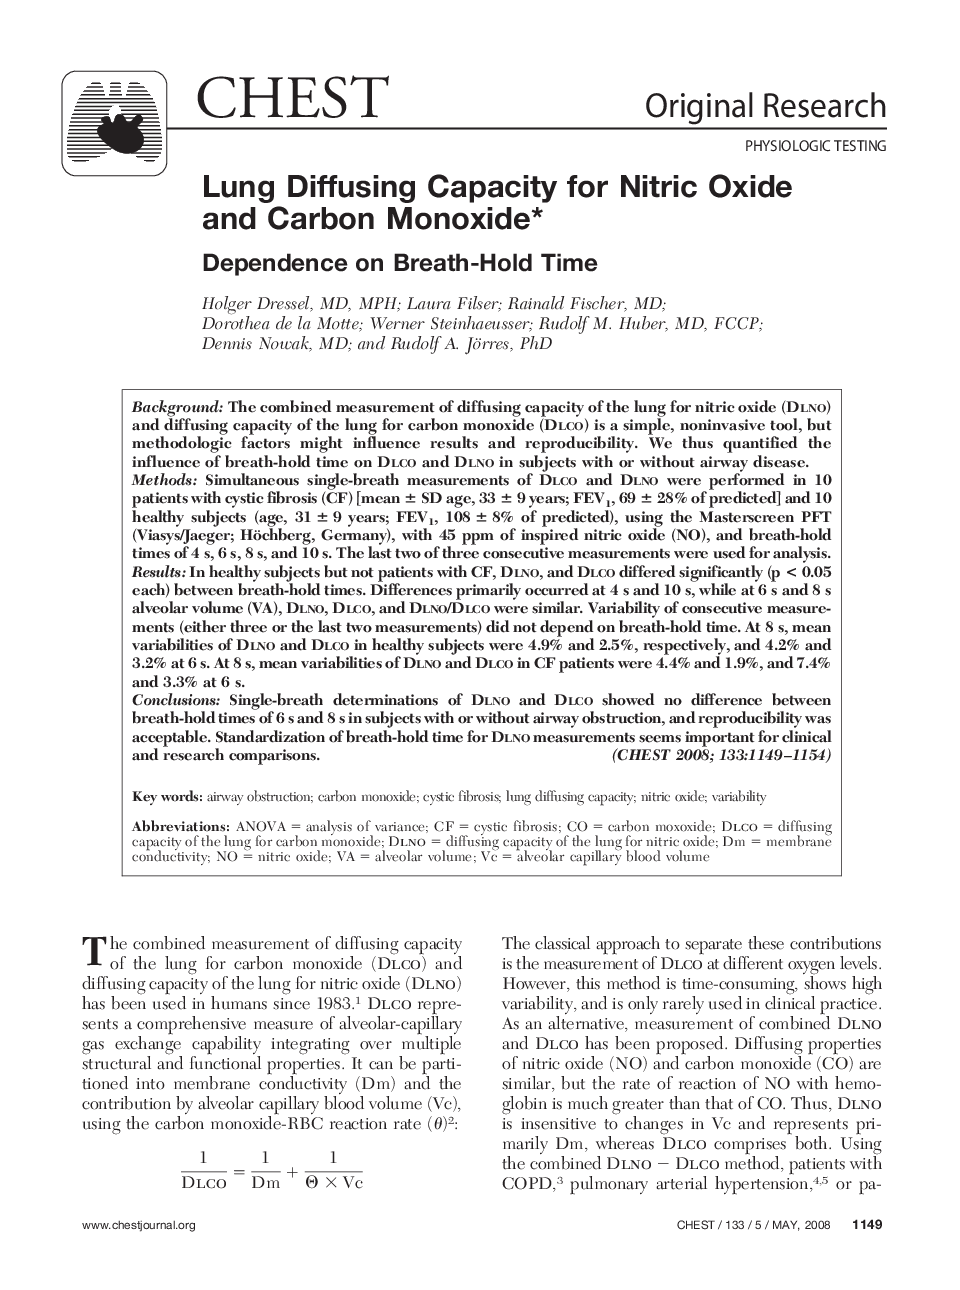 Lung Diffusing Capacity for Nitric Oxide and Carbon Monoxide 